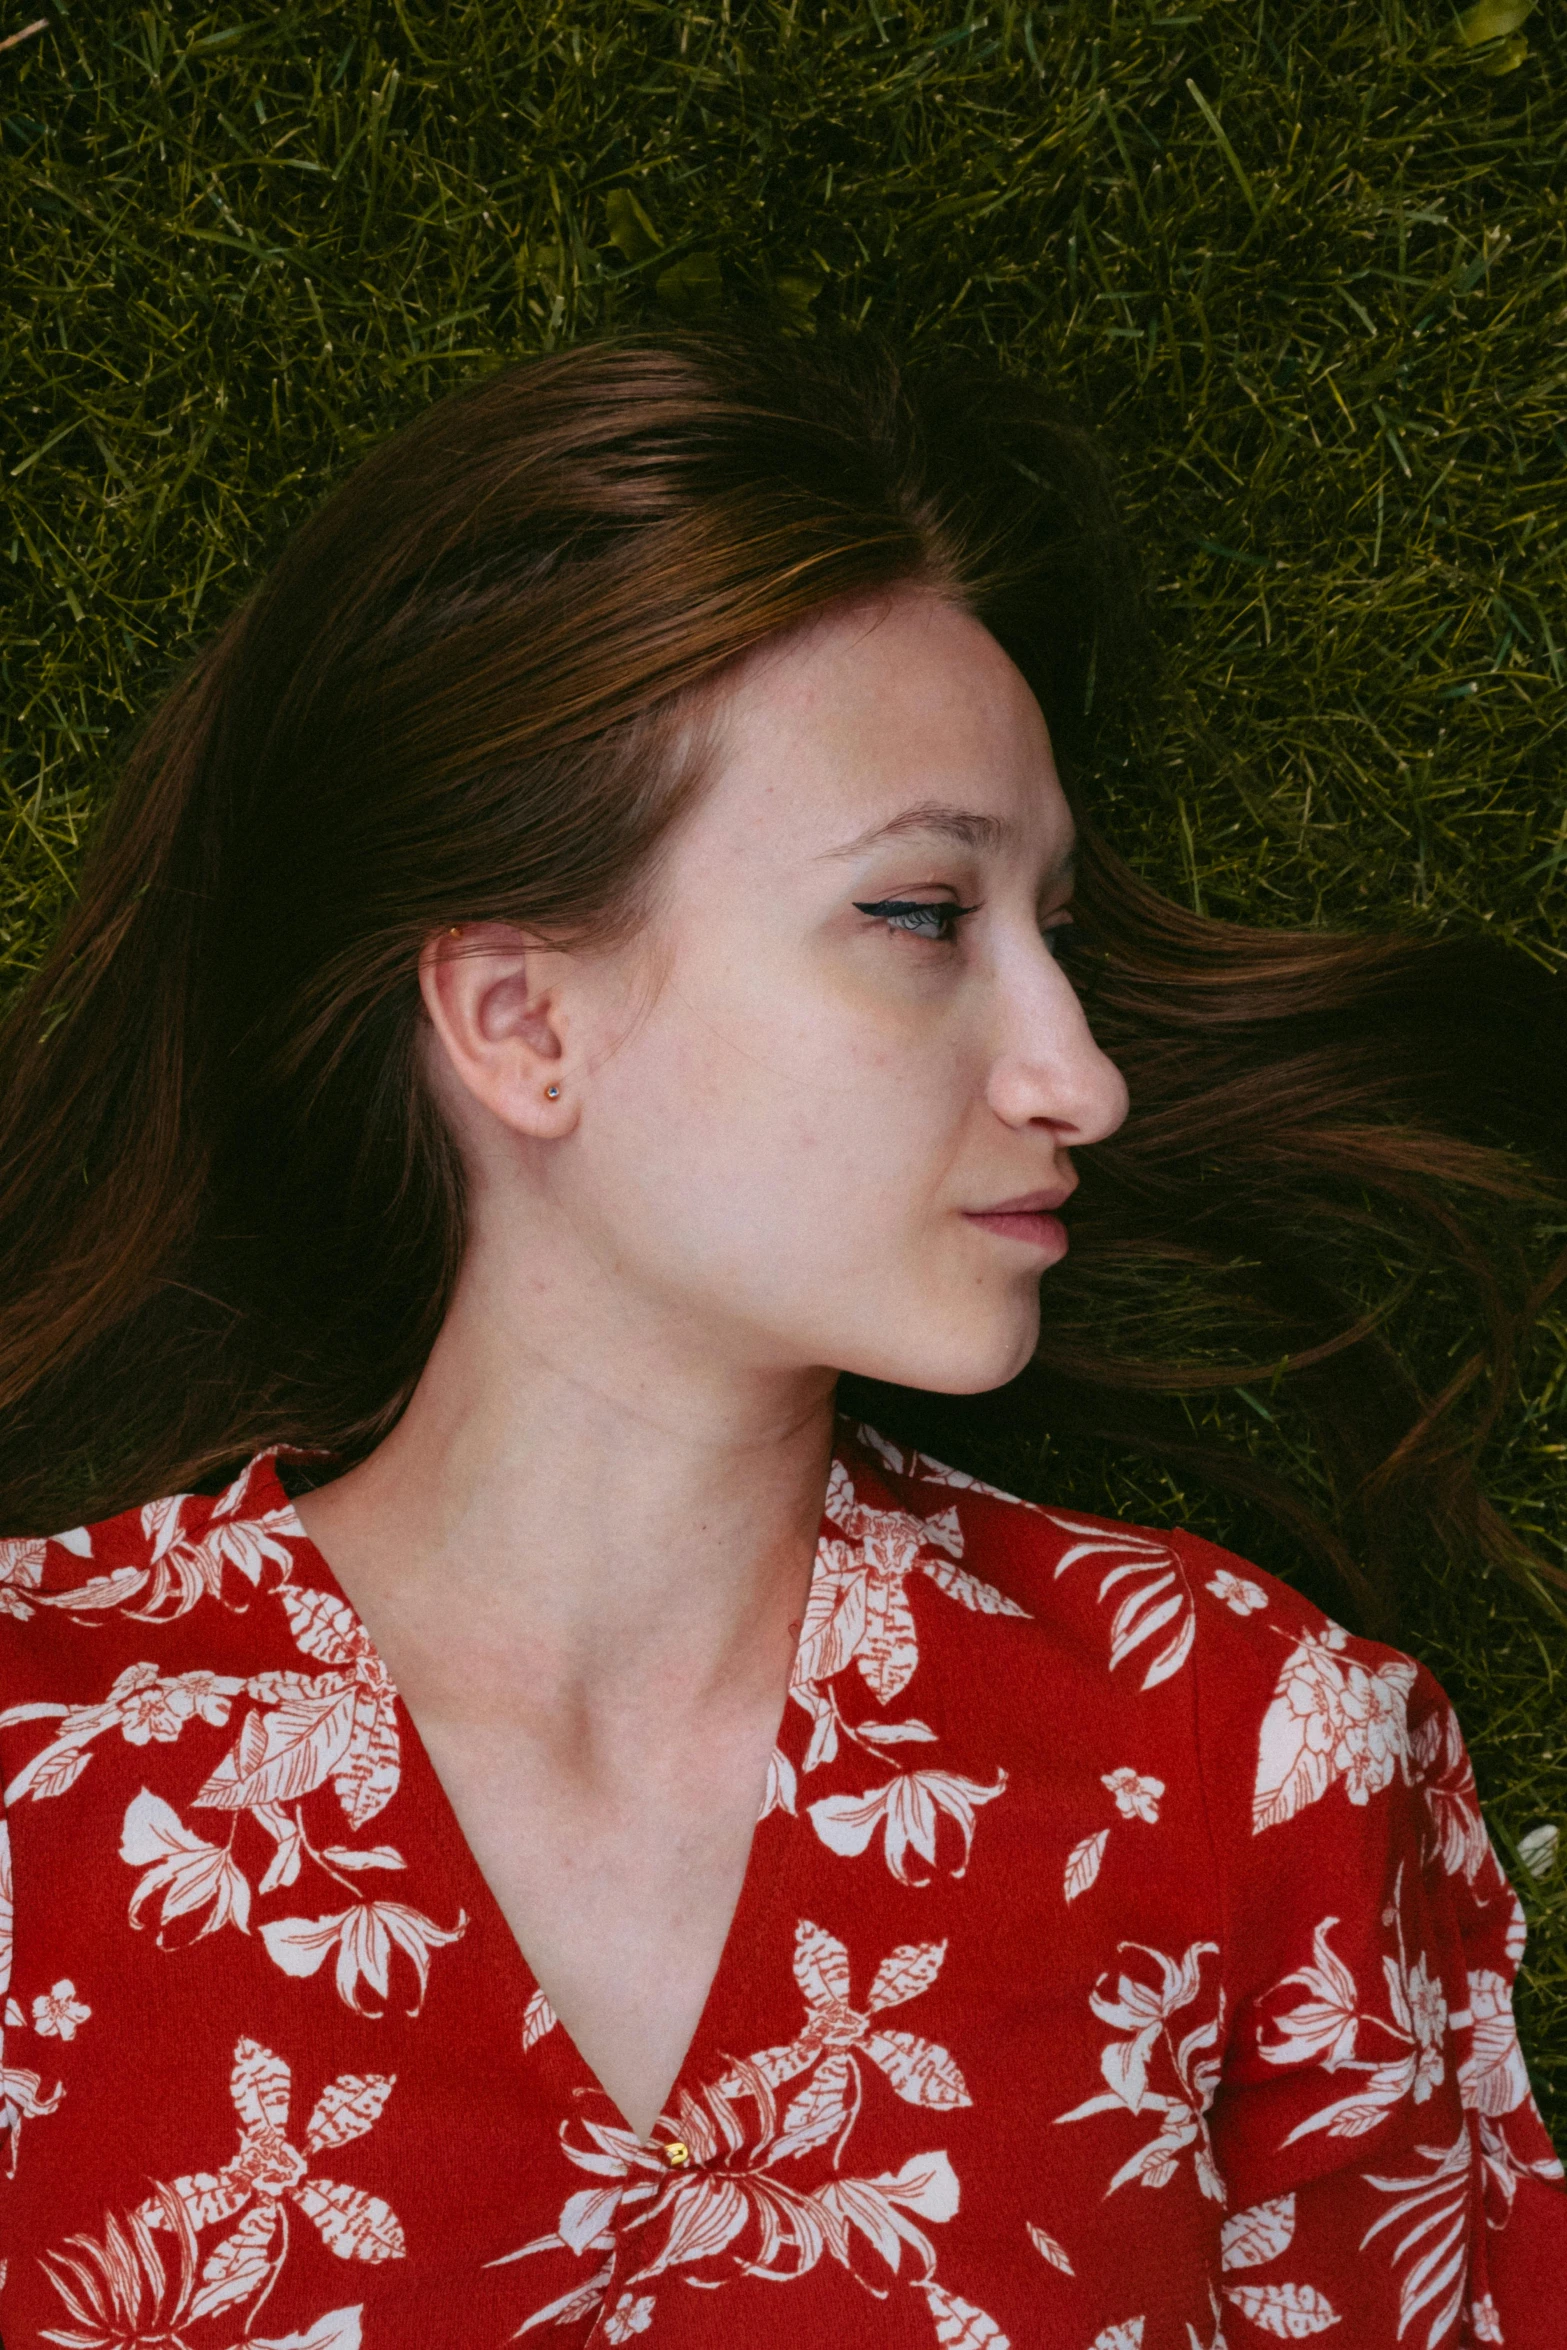 a young woman laying down in grass with her hair flying above her